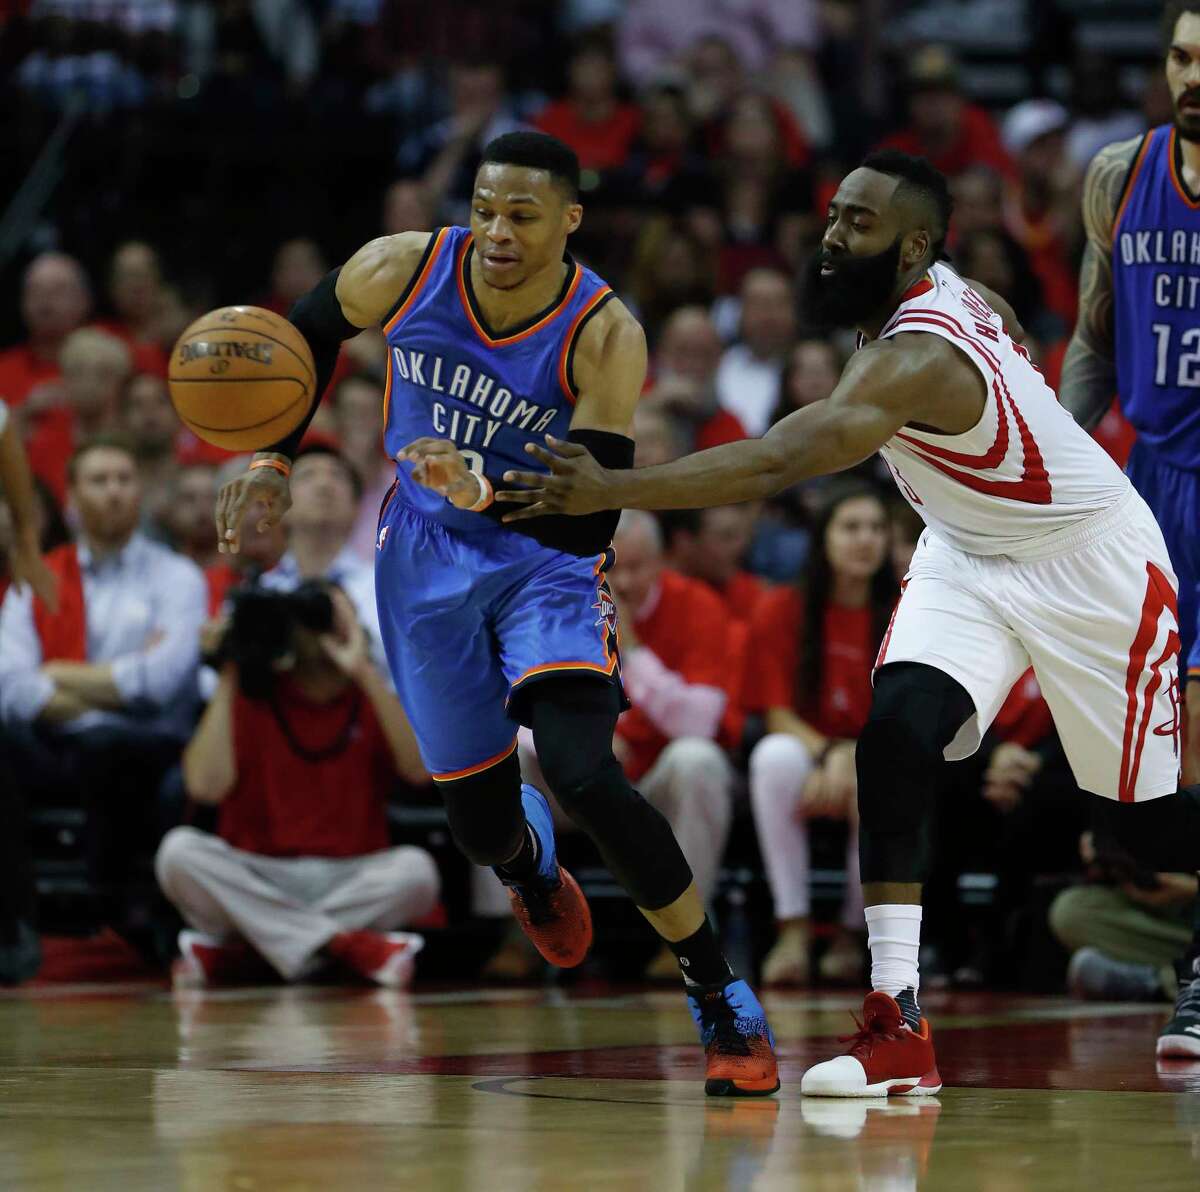 The 2016-17 season's Most Valuable Player in the National Basketball Association has come down to a contest between Oklahoma City Thunder guard Russell Westbrook, left, and Houston Rockets guard James Harden. The two are shown here in a playoff game April 24, 2017, in Houston. Voting on the MVP has concluded but the winner won't be announced until June 26, 2017, on live television.  Keep clicking to see a gallery of meet-ups between the two amazing players: